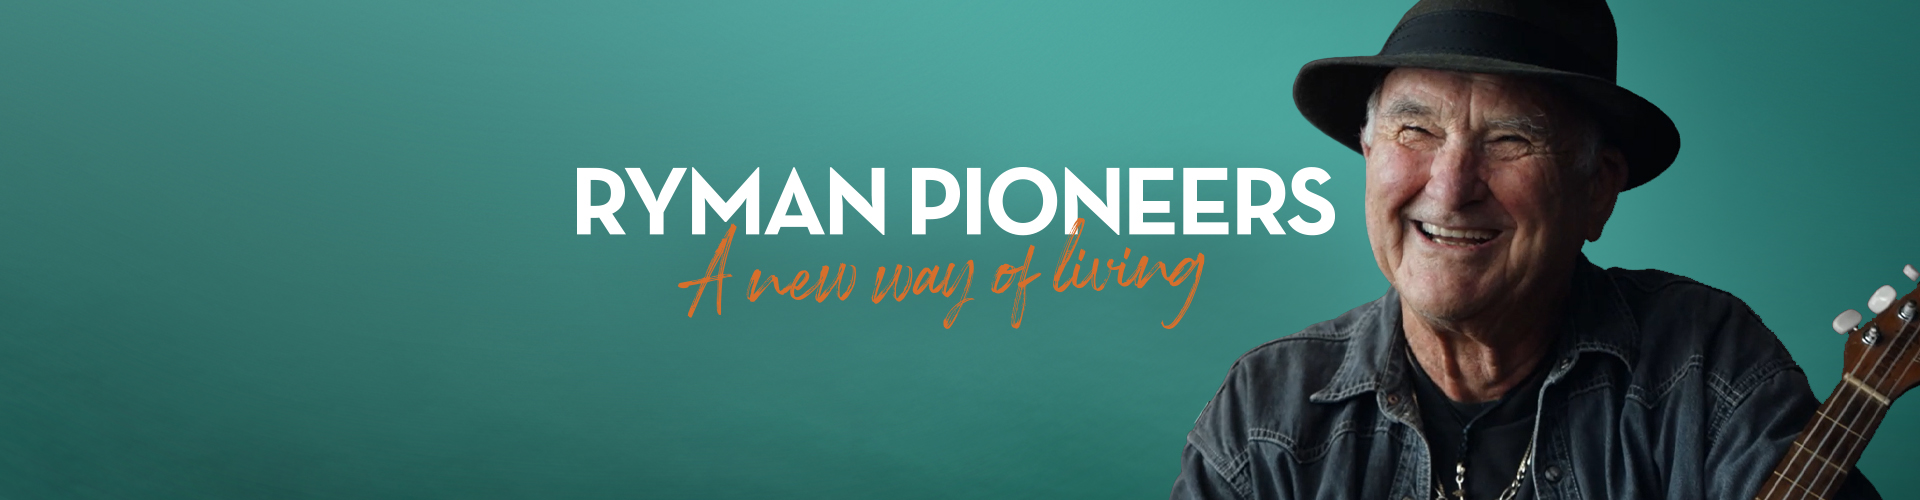 Ryman Pioneers a new way of living homepage mobile banner